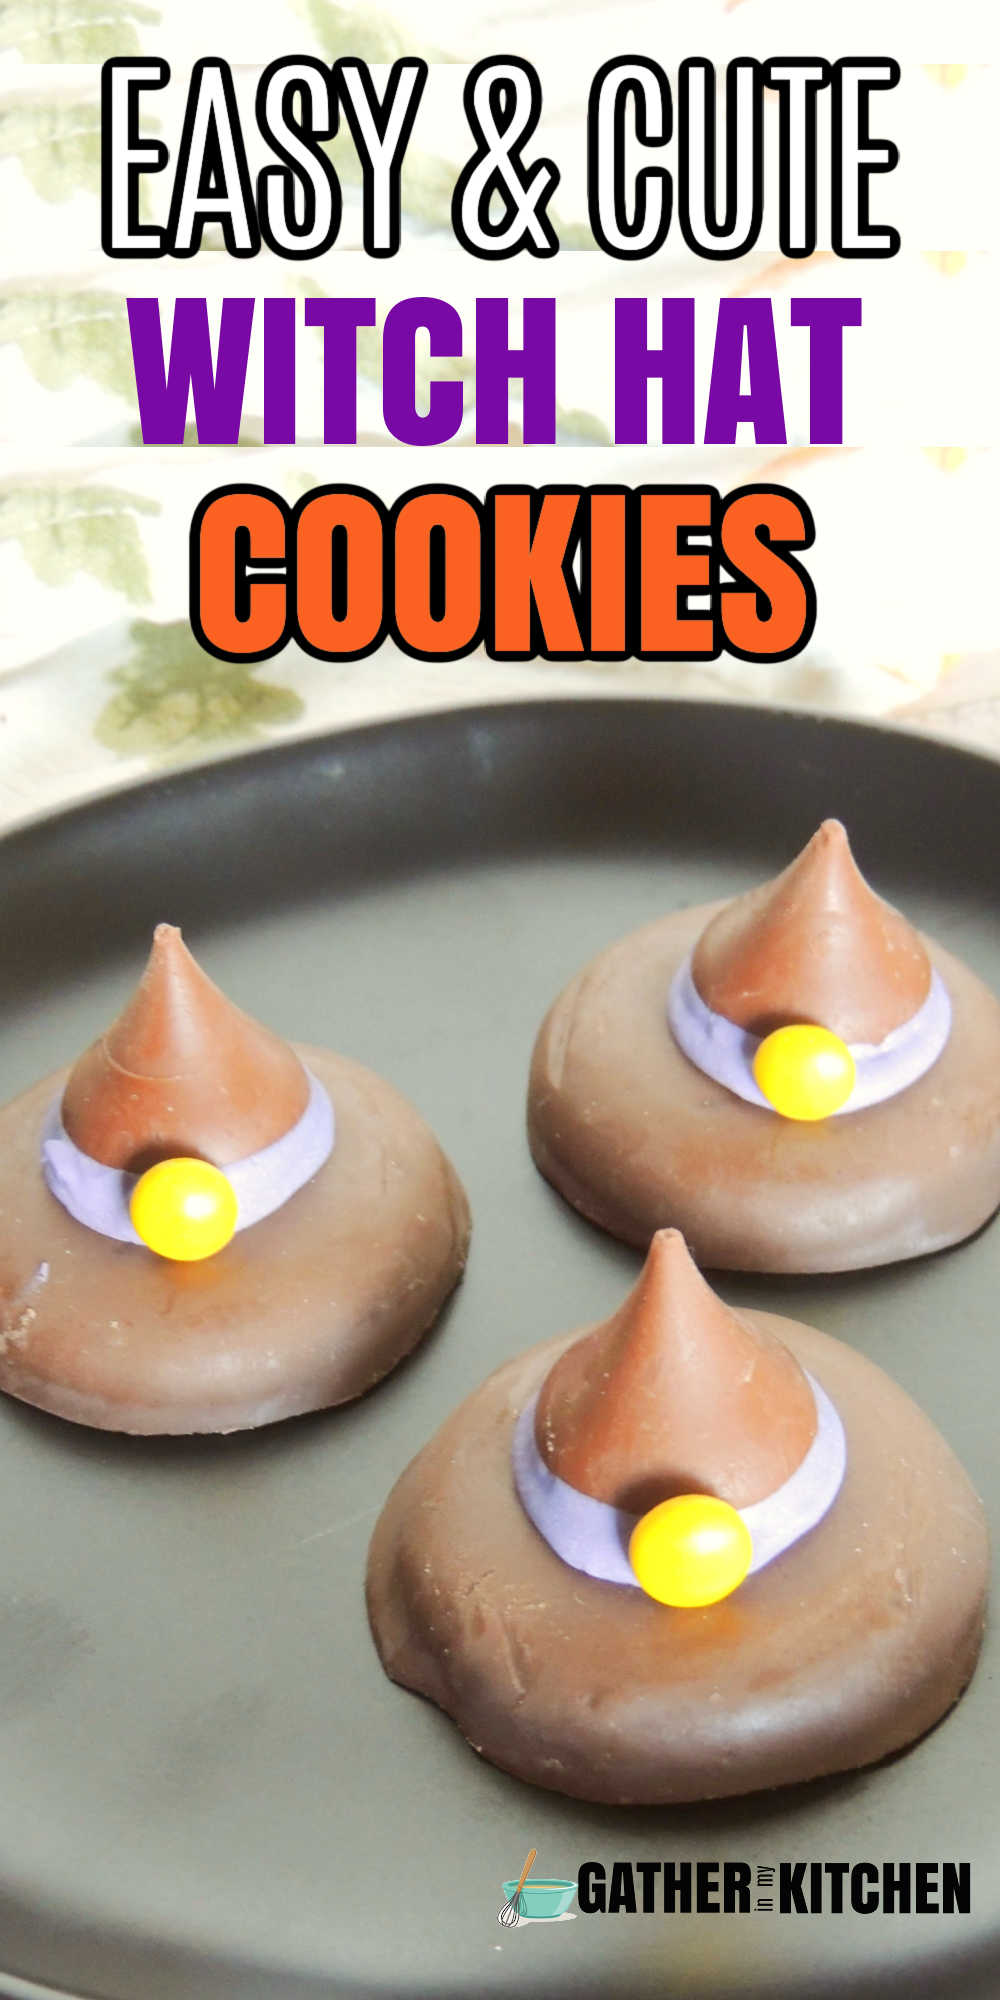 pin image: top says "Easy & Cute Witch Hat Cookies" with a background of Witch hats on a black plate.